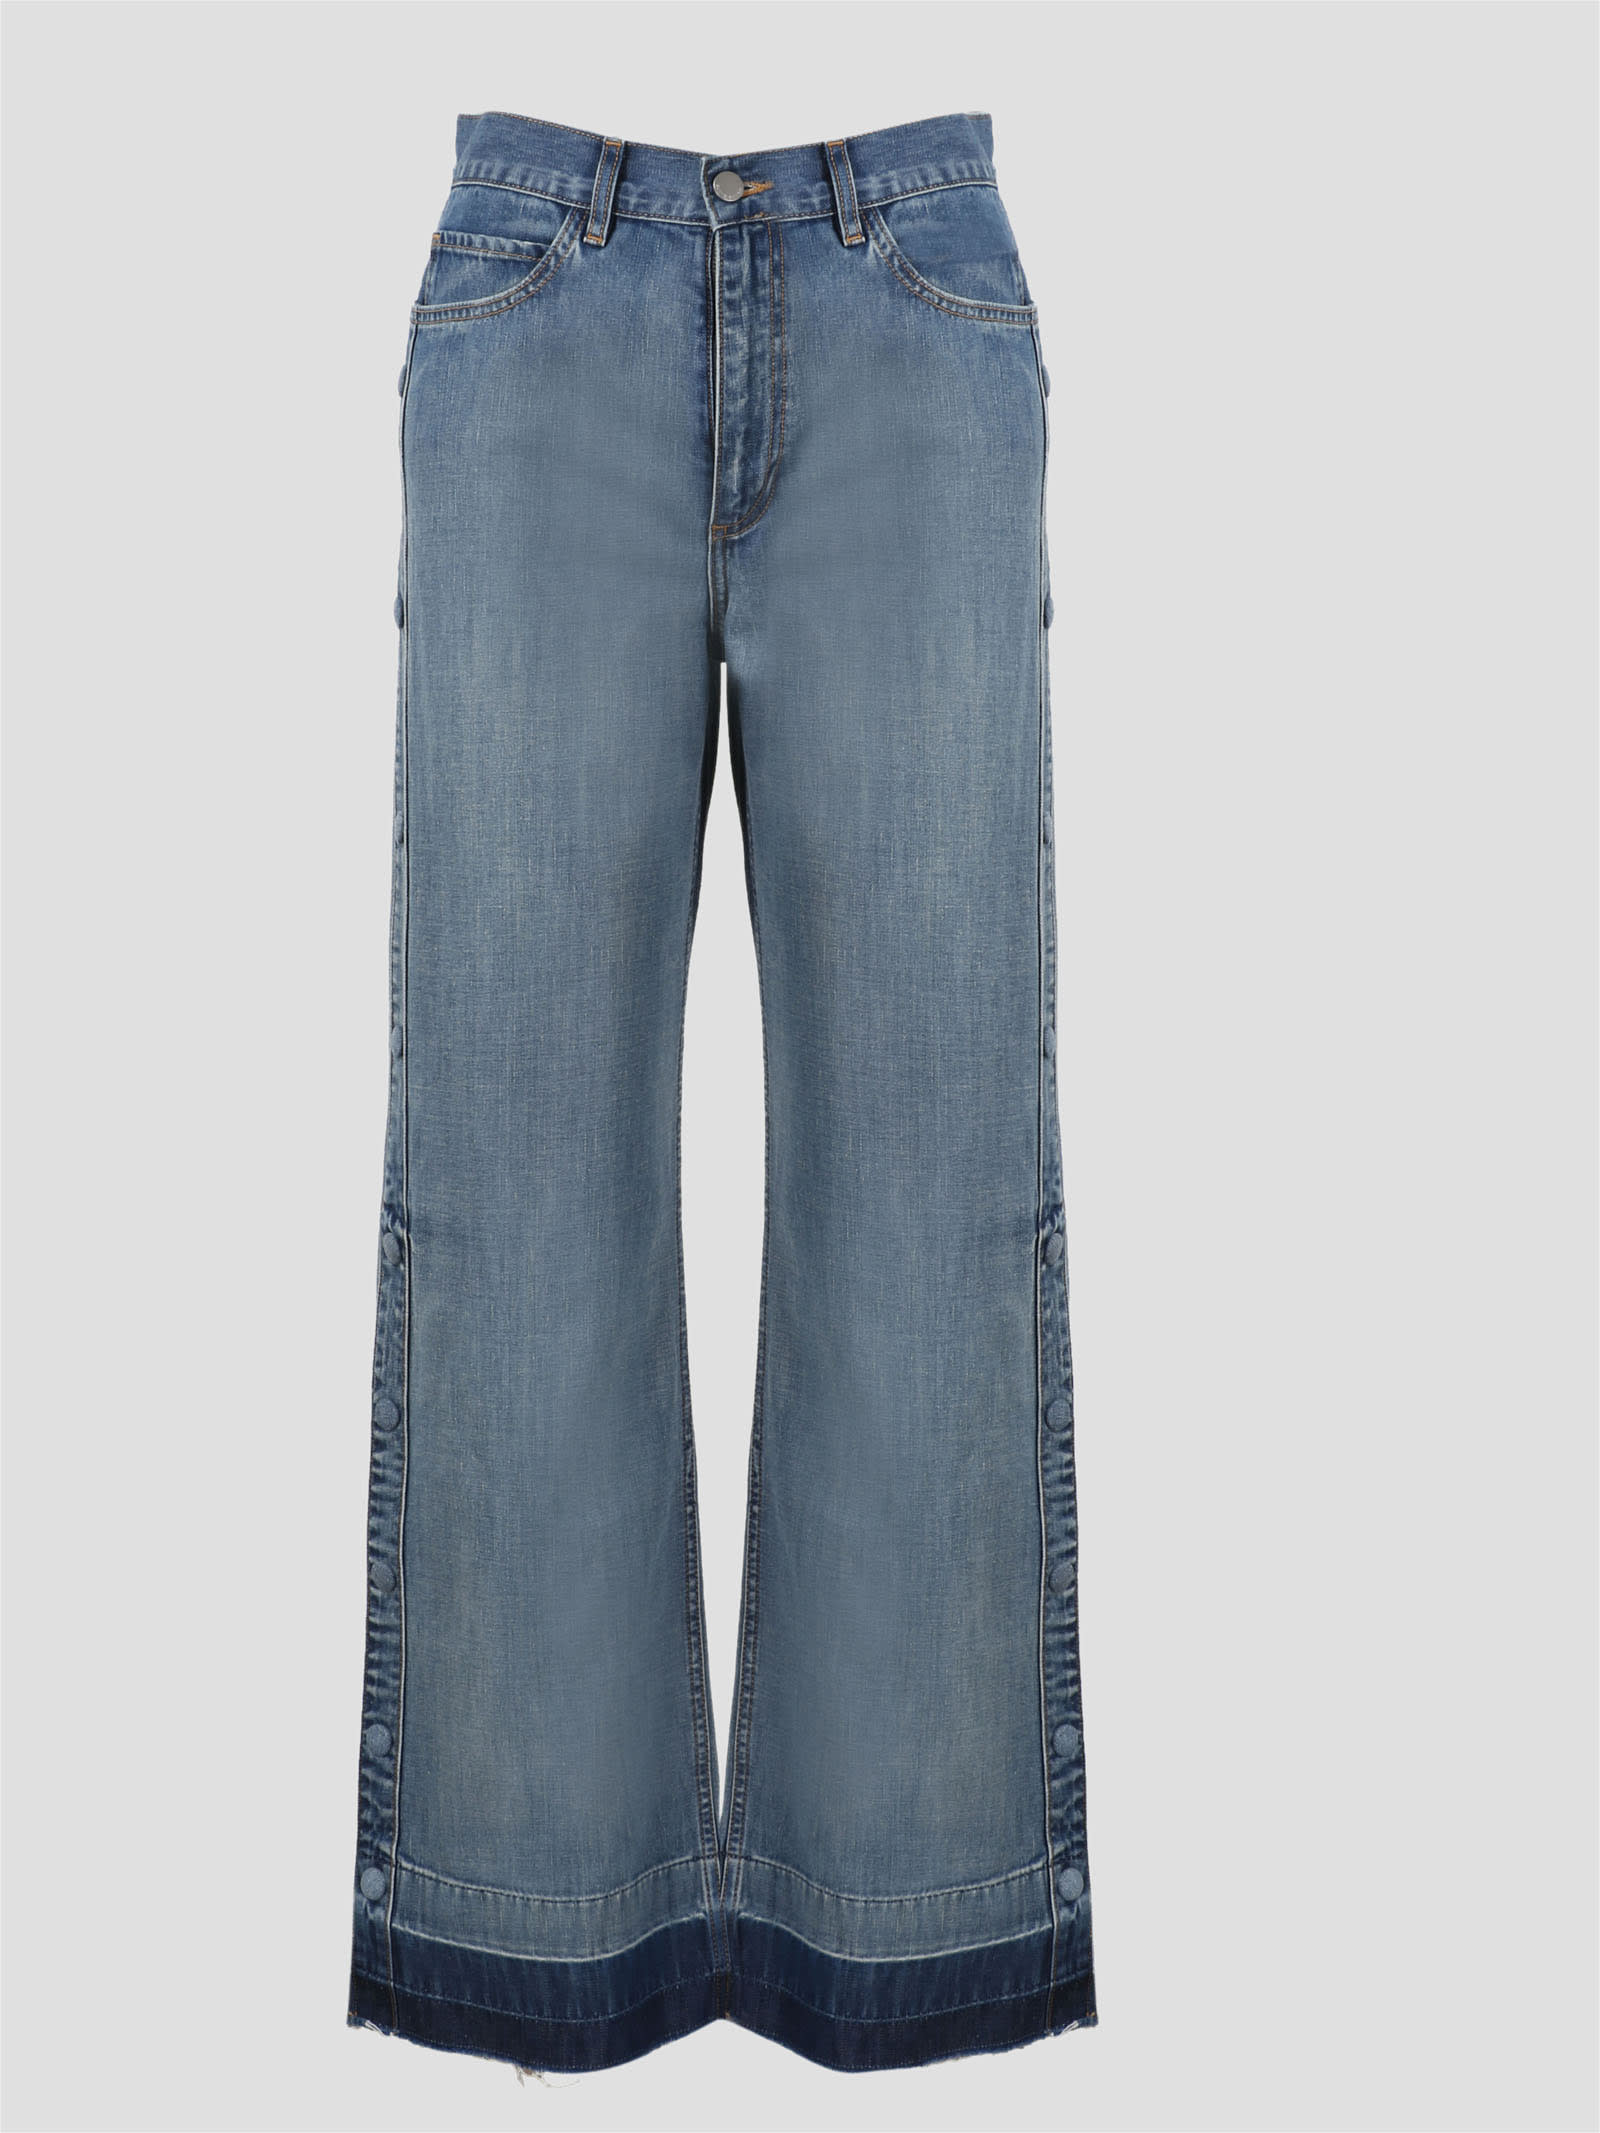 RED Valentino Side Clips Wide Jeans